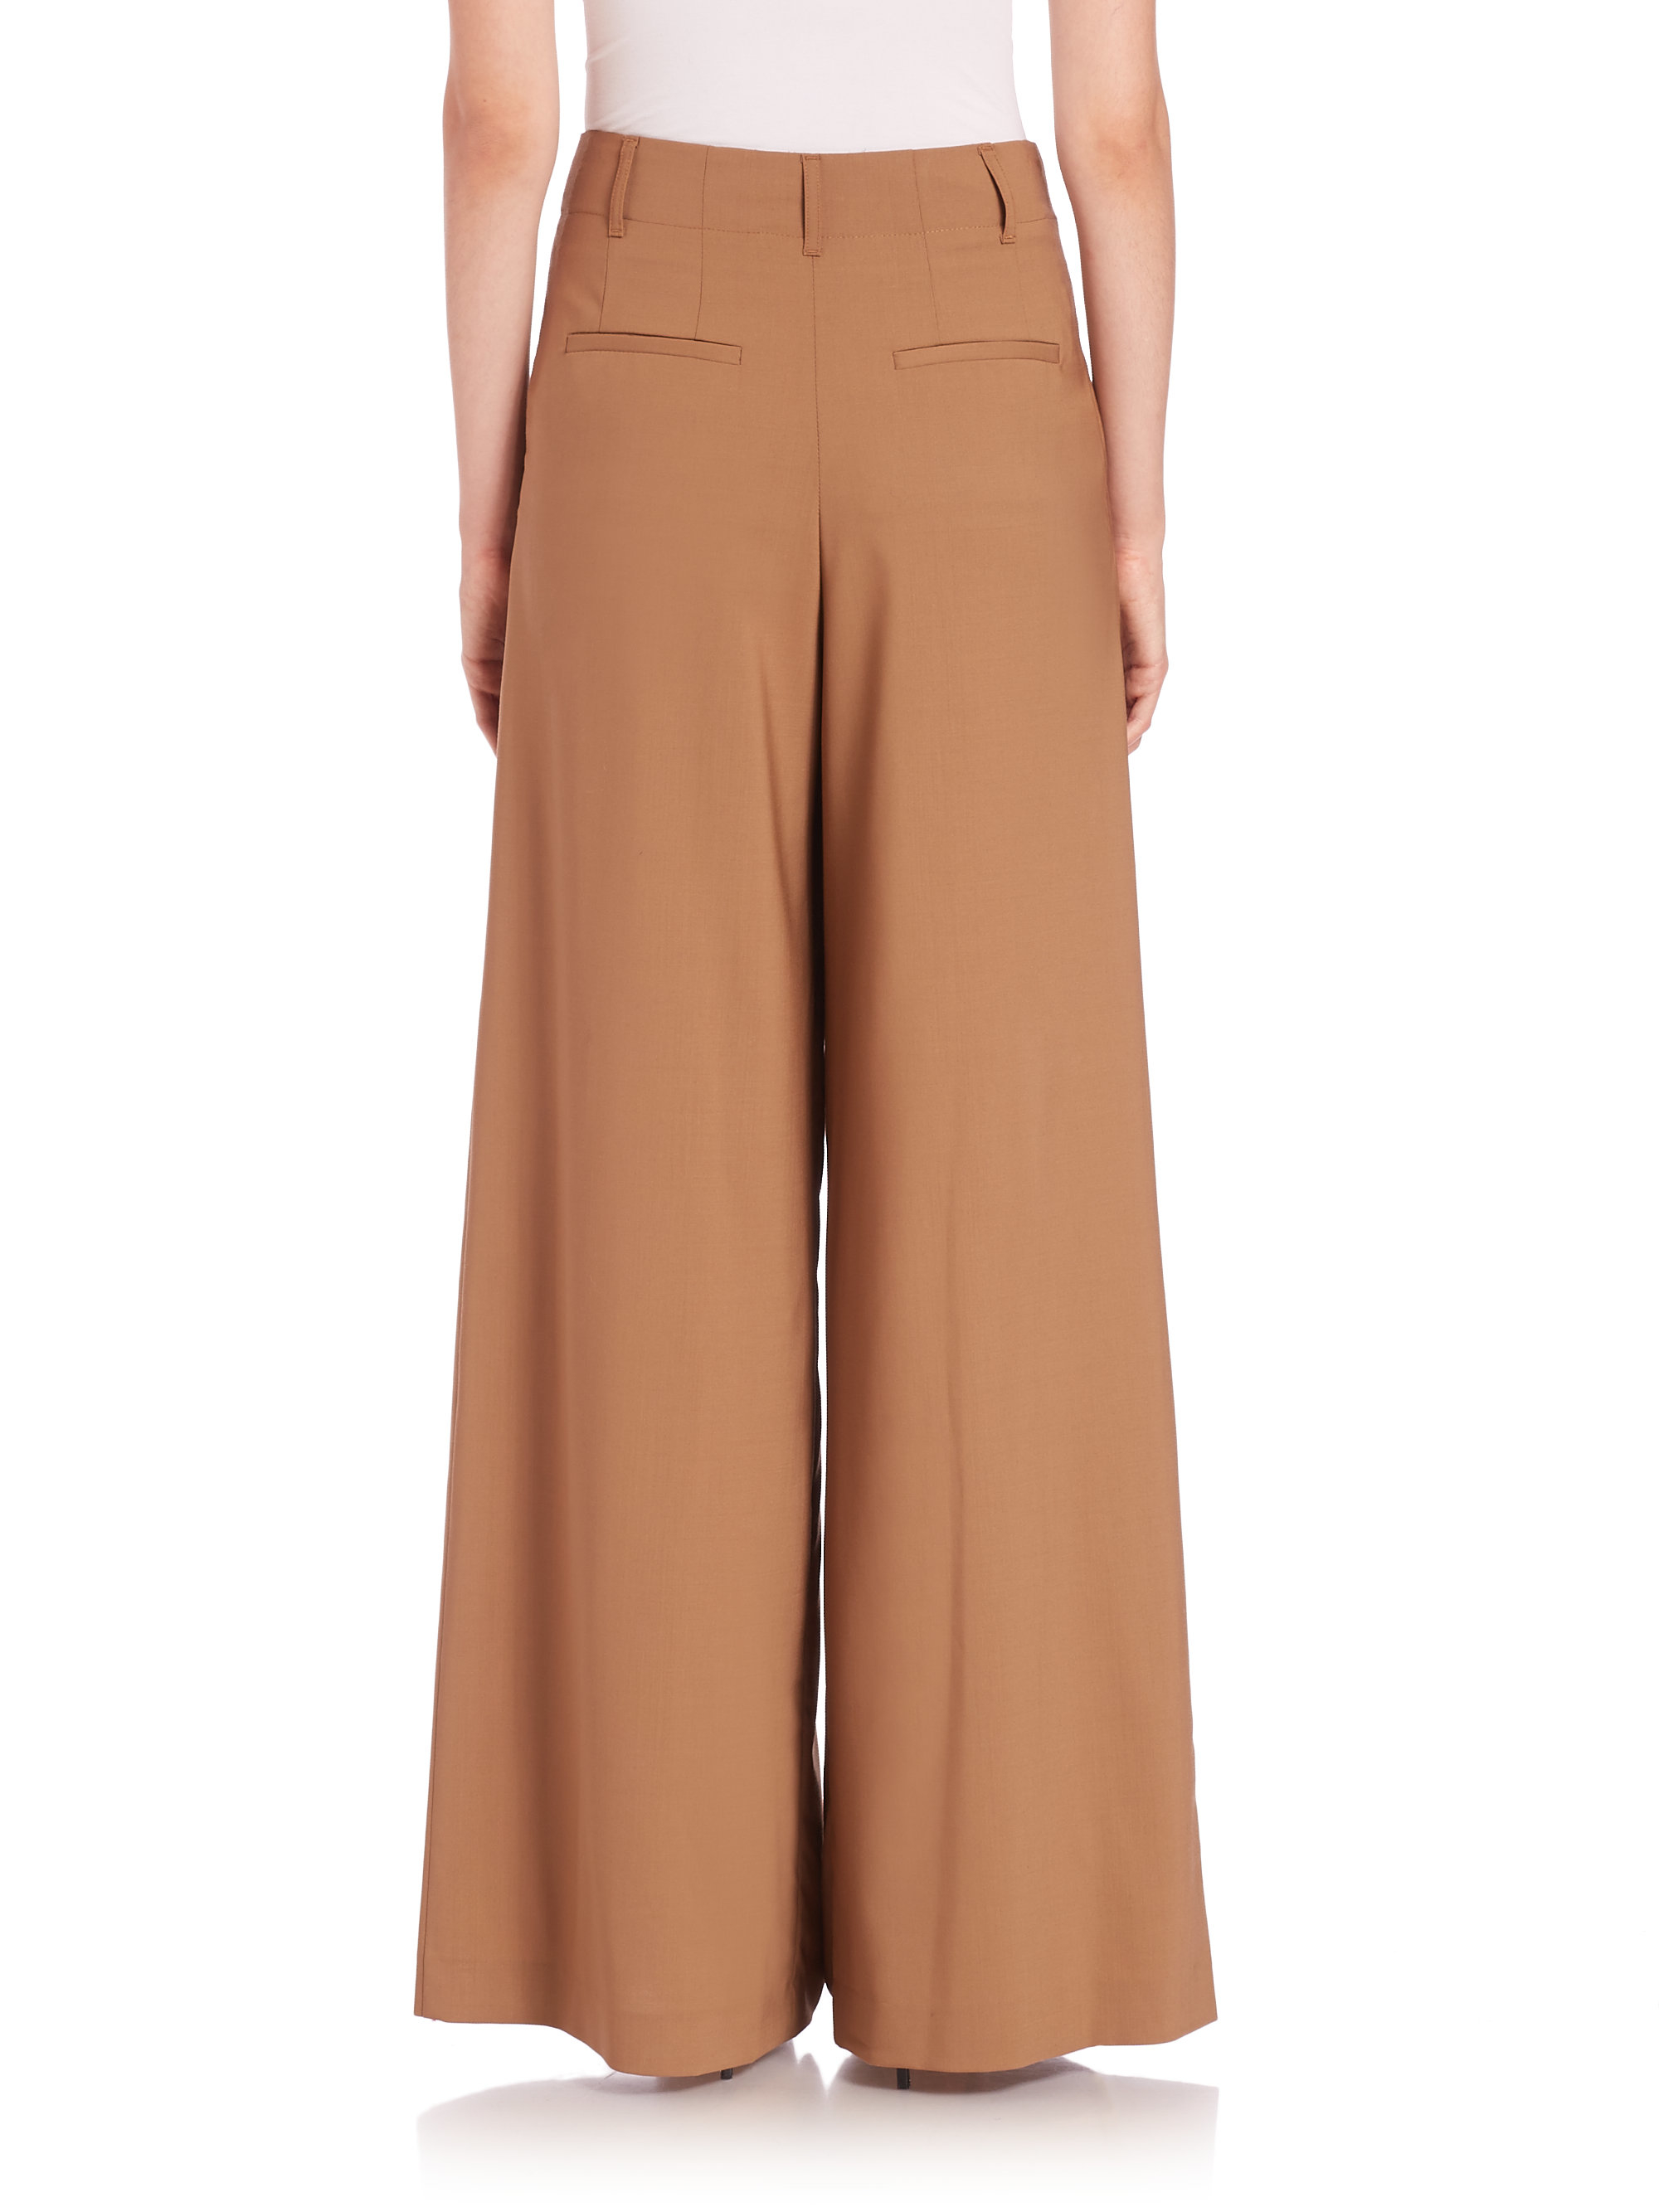 Lyst - Alice + Olivia High-rise Wide-leg Trousers in Natural